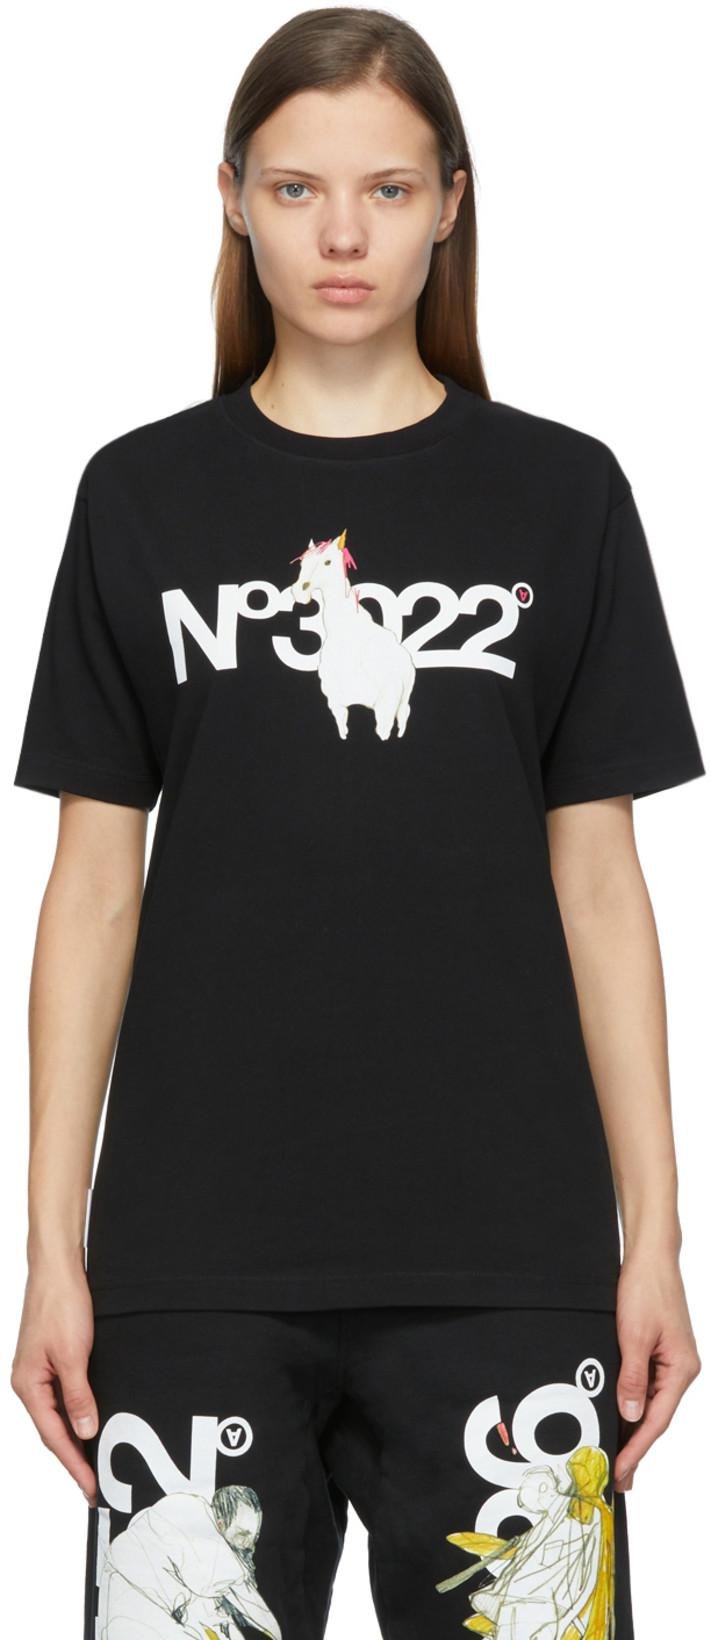 SSENSE Exclusive Black 'N.3022' T-Shirt by AITOR THROUPS THE DSA